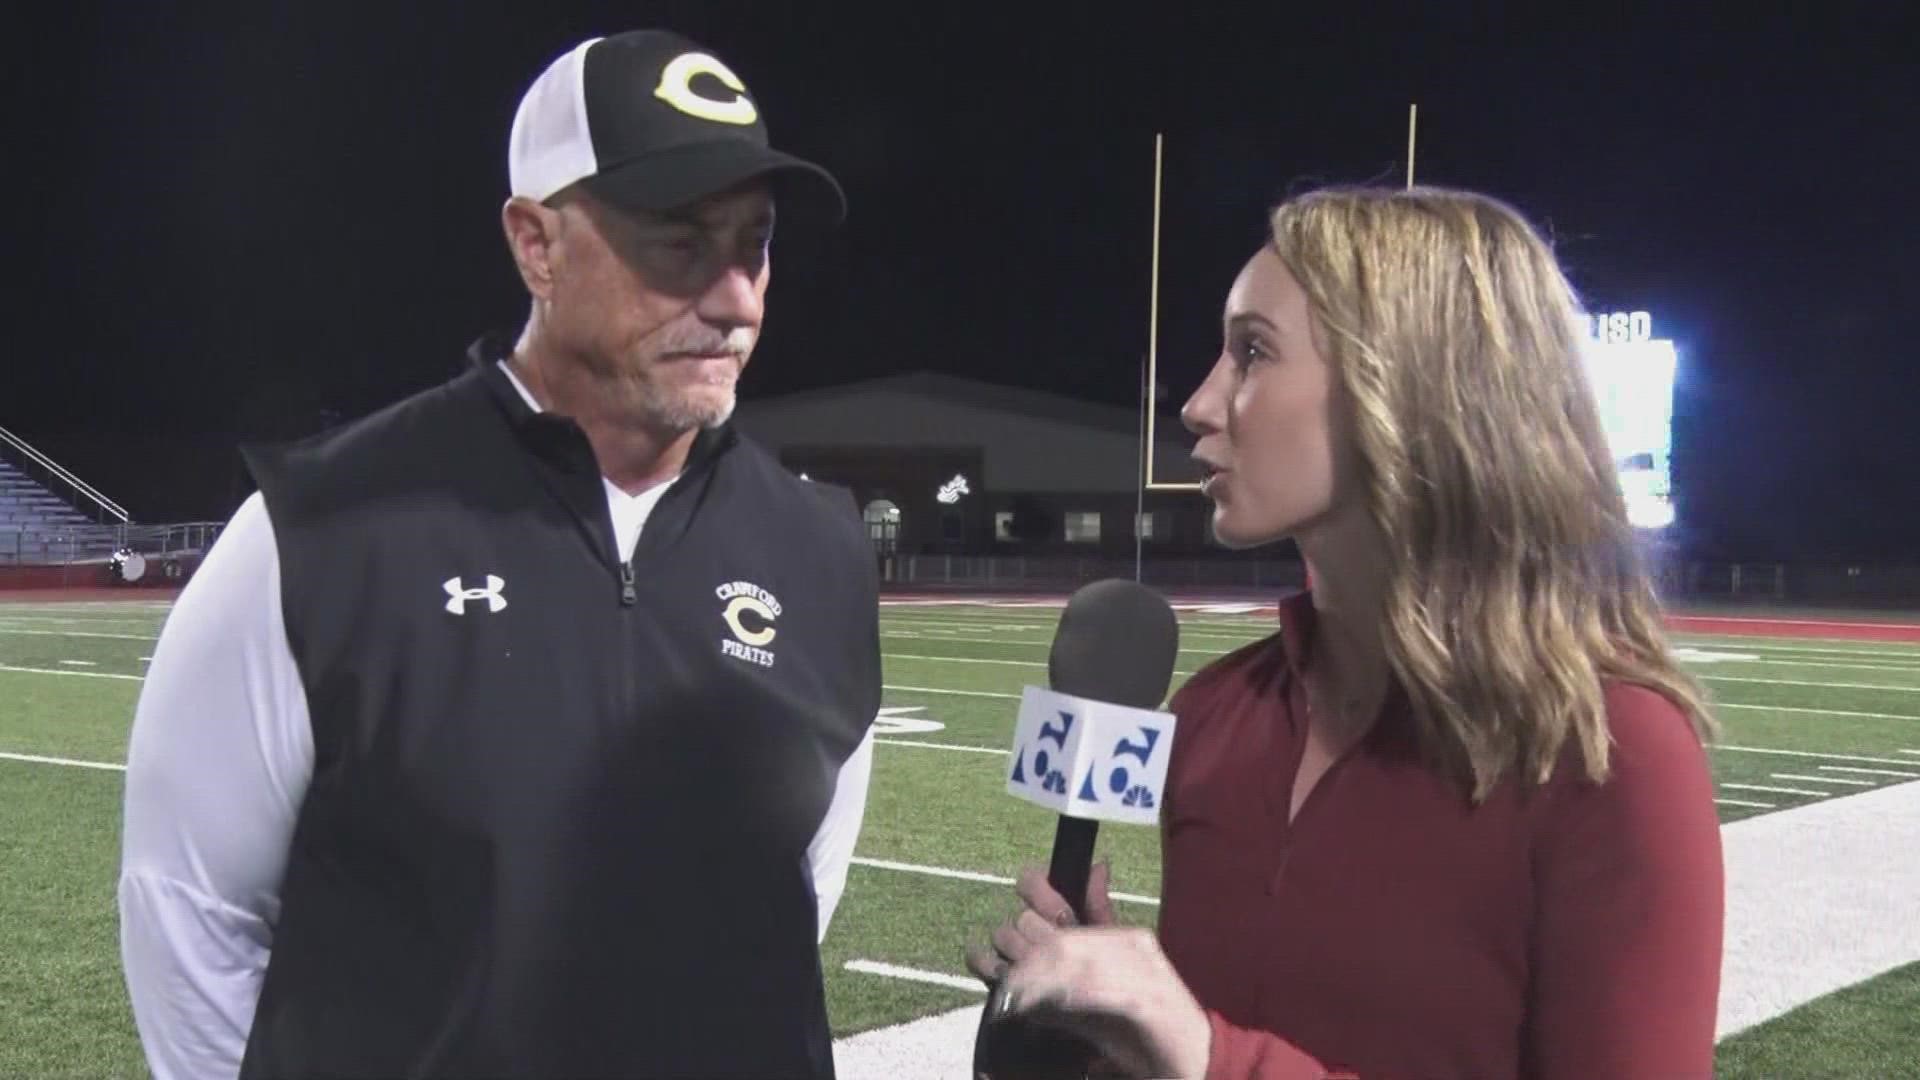 Hear about two big matchups for Harker Heights and Crawford.